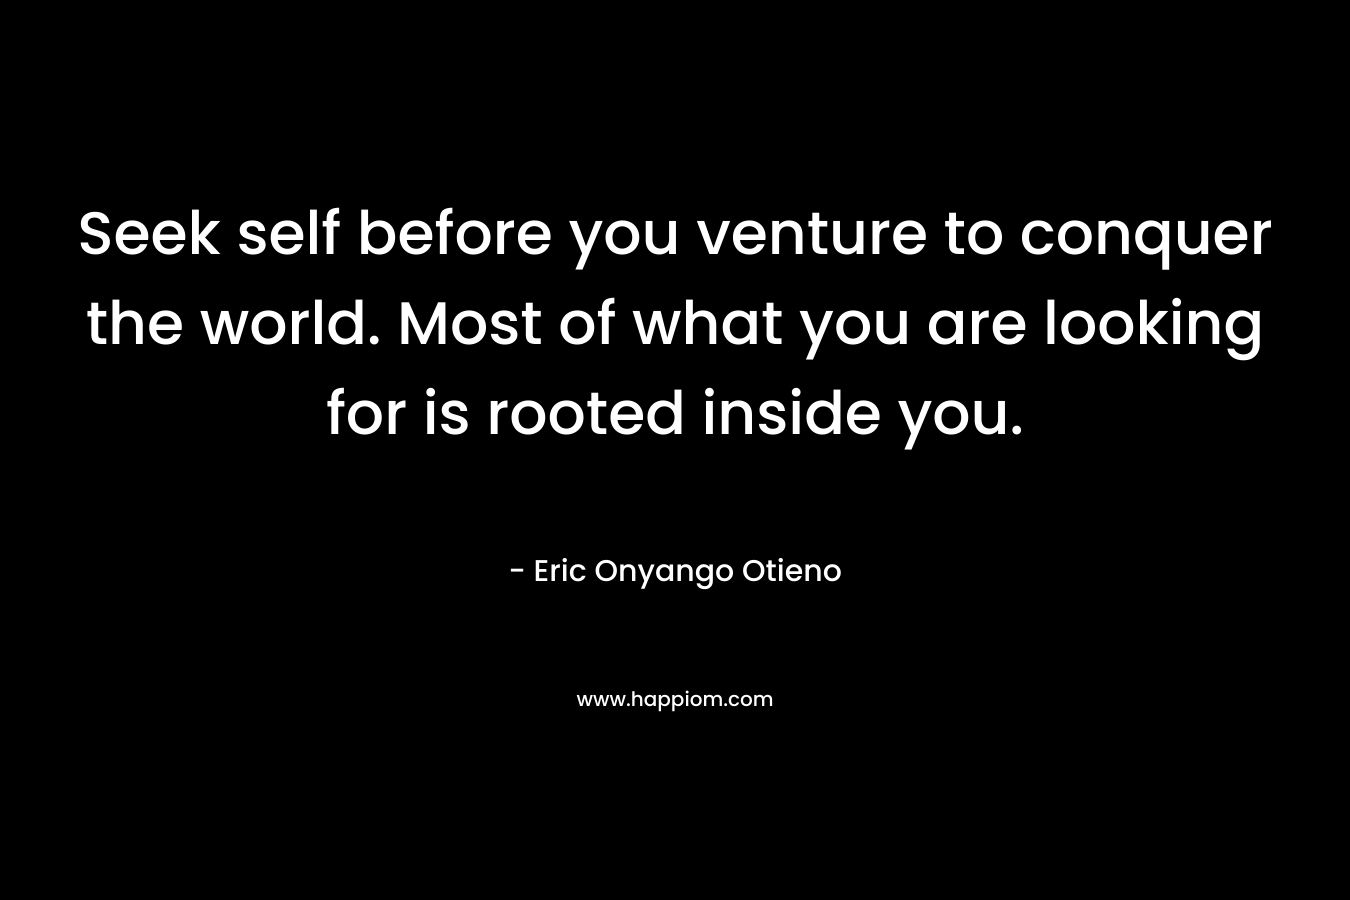 Seek self before you venture to conquer the world. Most of what you are looking for is rooted inside you.